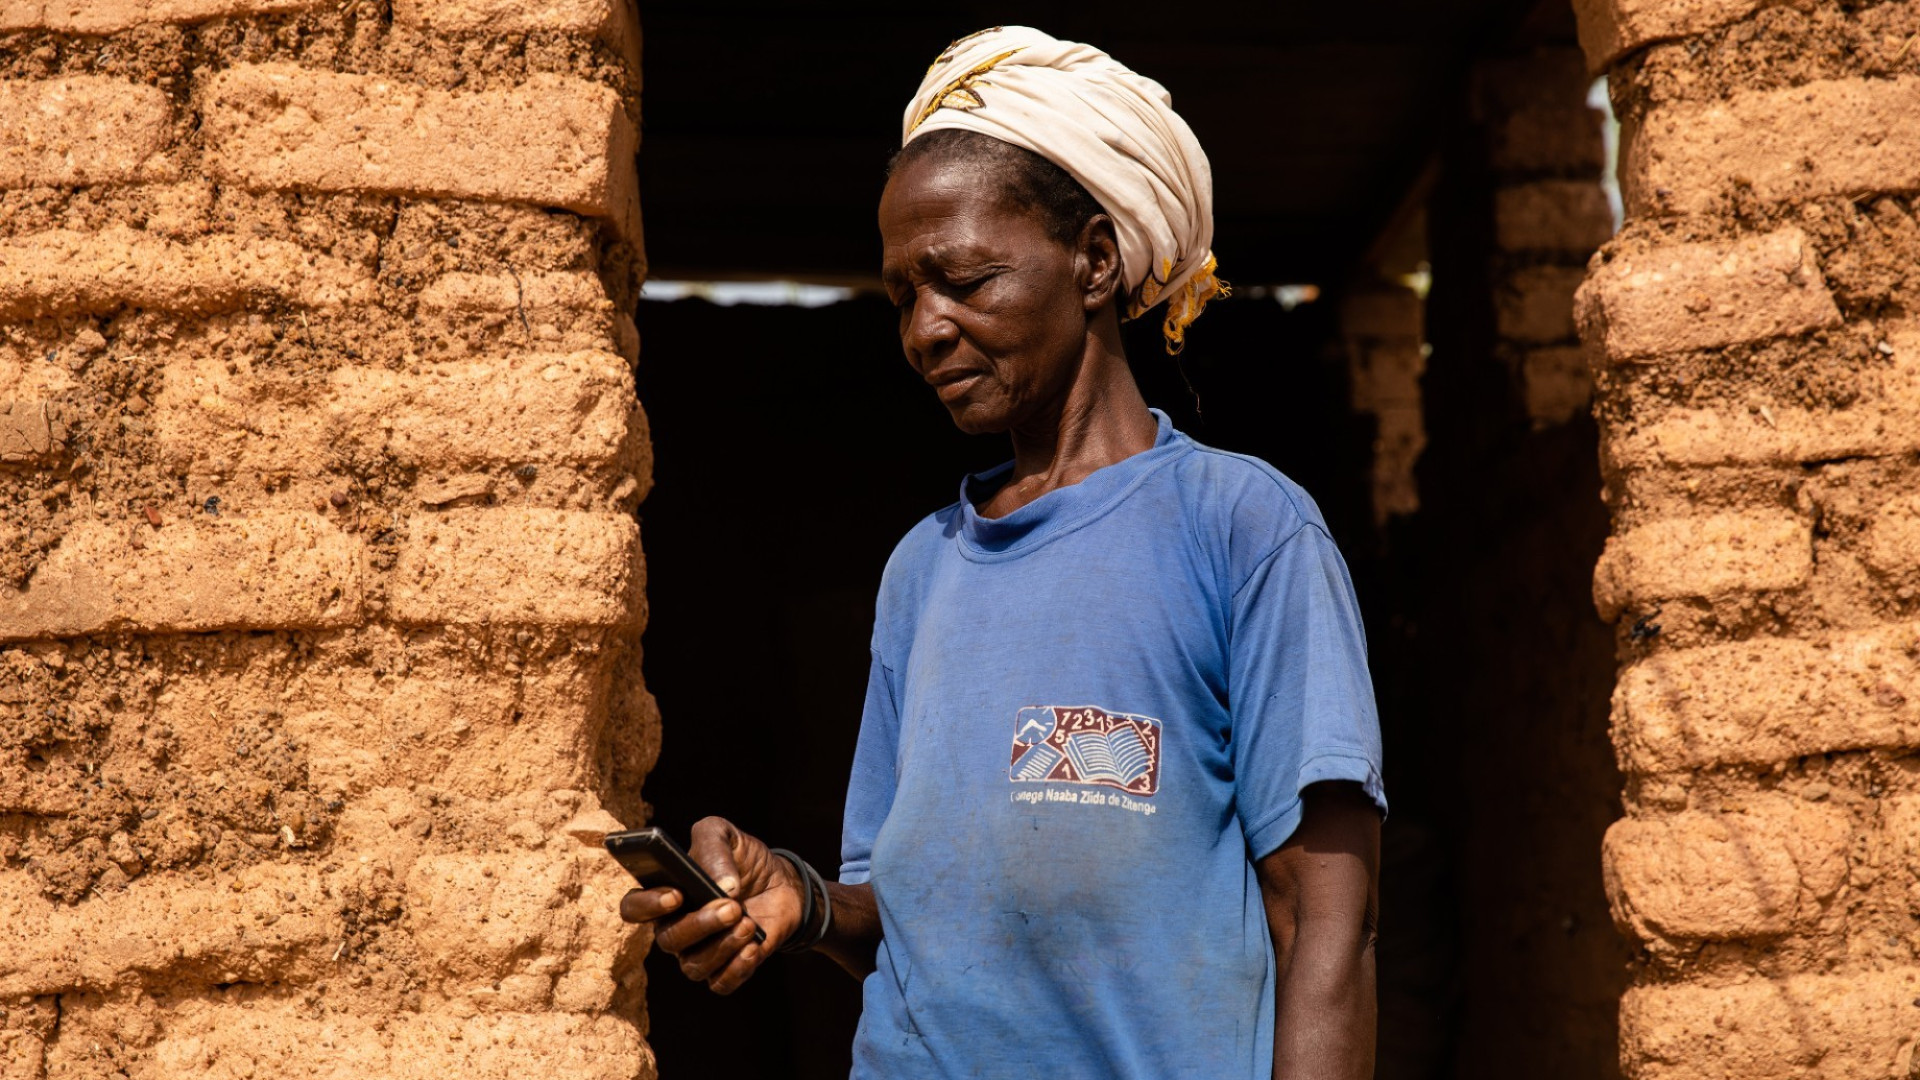 A woman holding a mobile phone demonstrating DMI's use of phones to distribute video campaigns